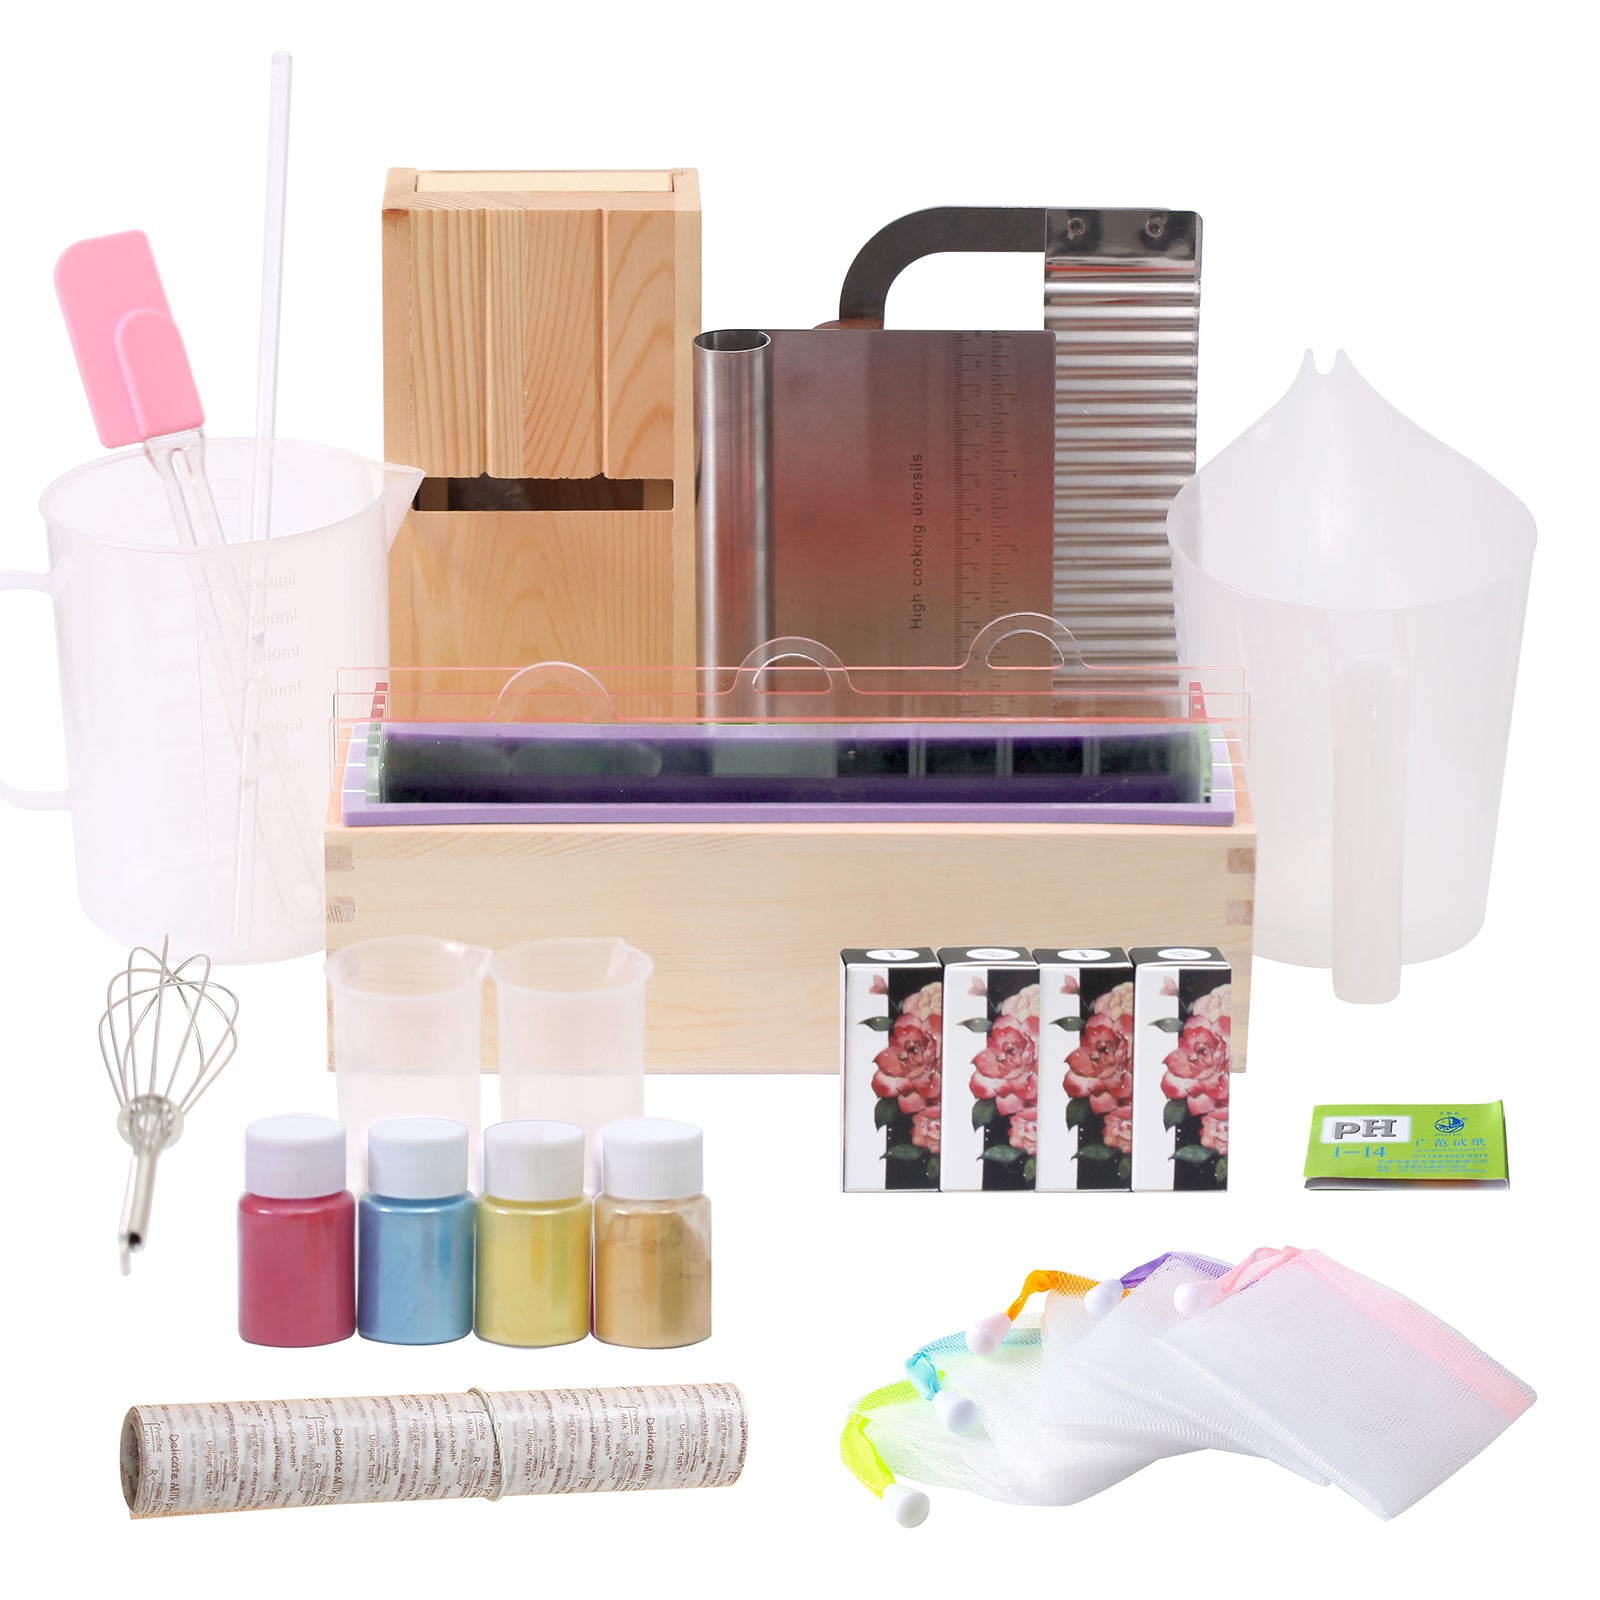  BOOWAN NICOLE Complete DIY Soap Making Supplies Kit Full  Beginners Set Including Silicone Mold, Planer Wood Box, Soap Base,  Spatulas, Pipette and More